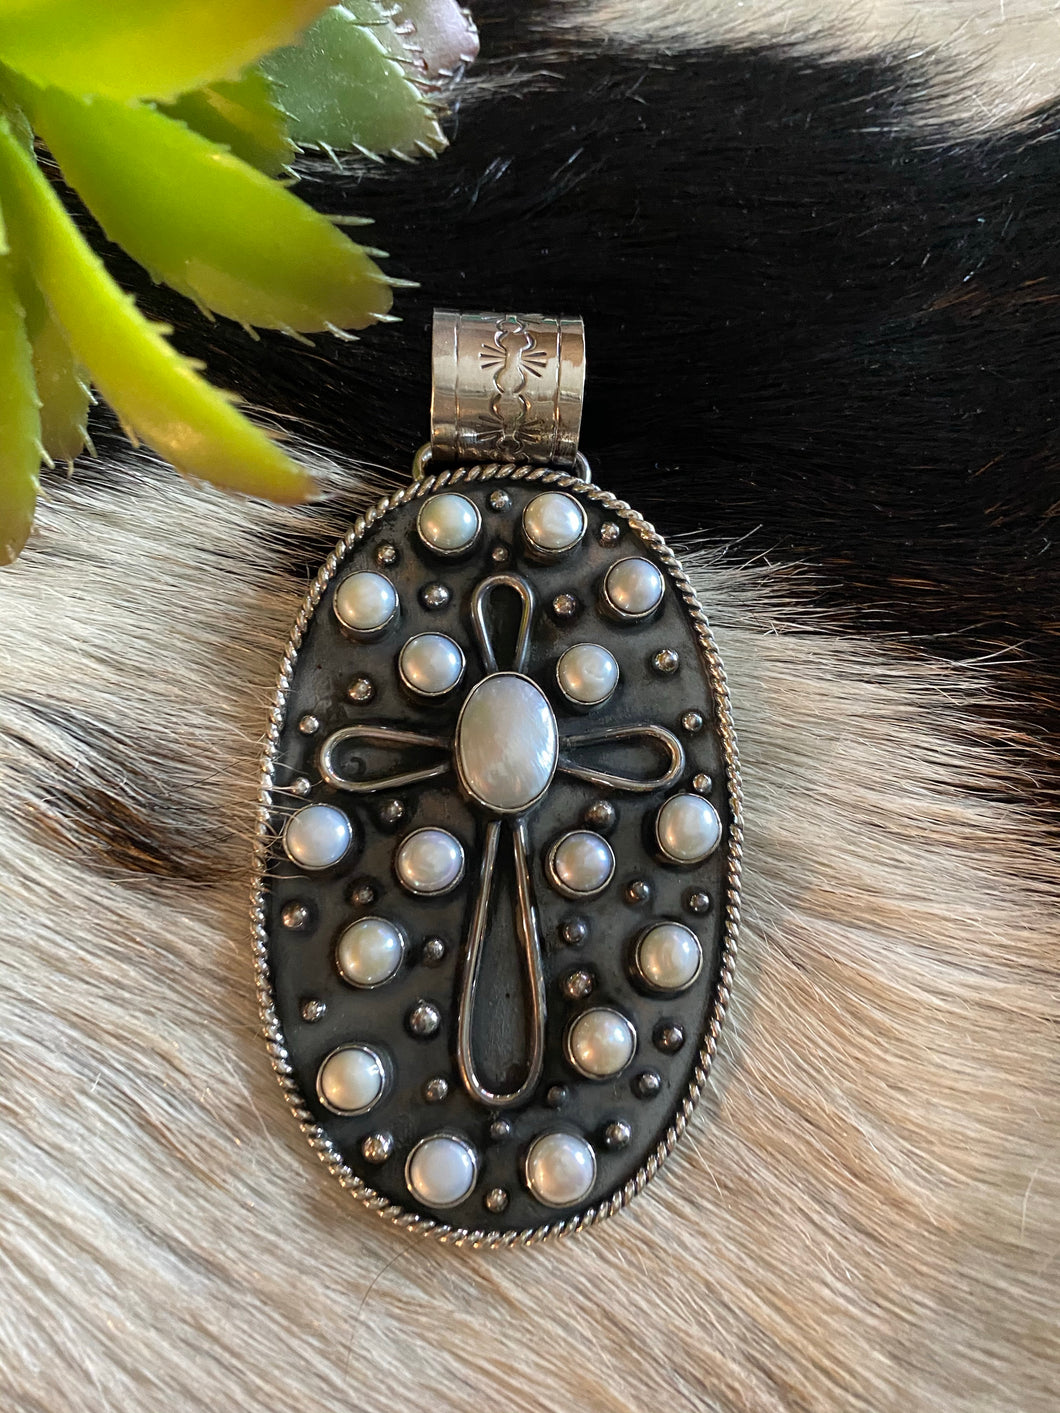 “The Freshwater Pearl queen” pendant